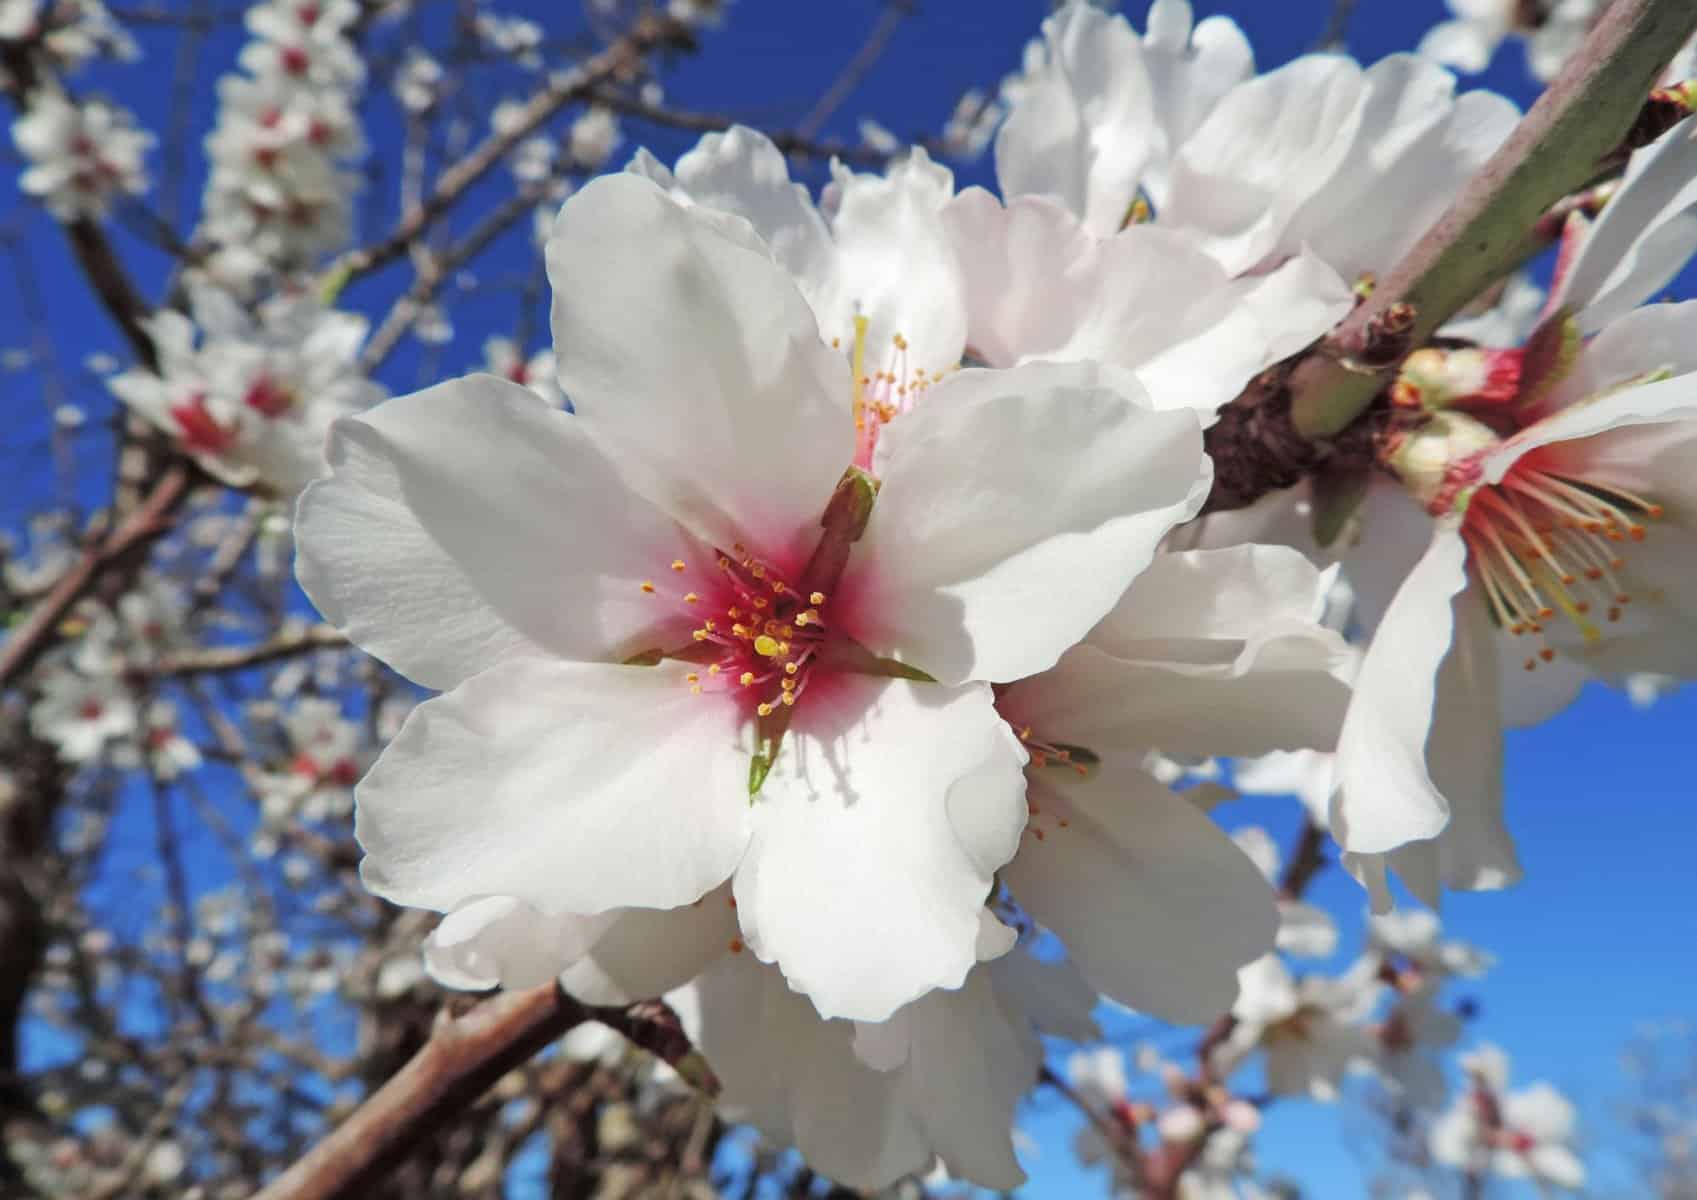 A beautiful white and pink almond blossom flower